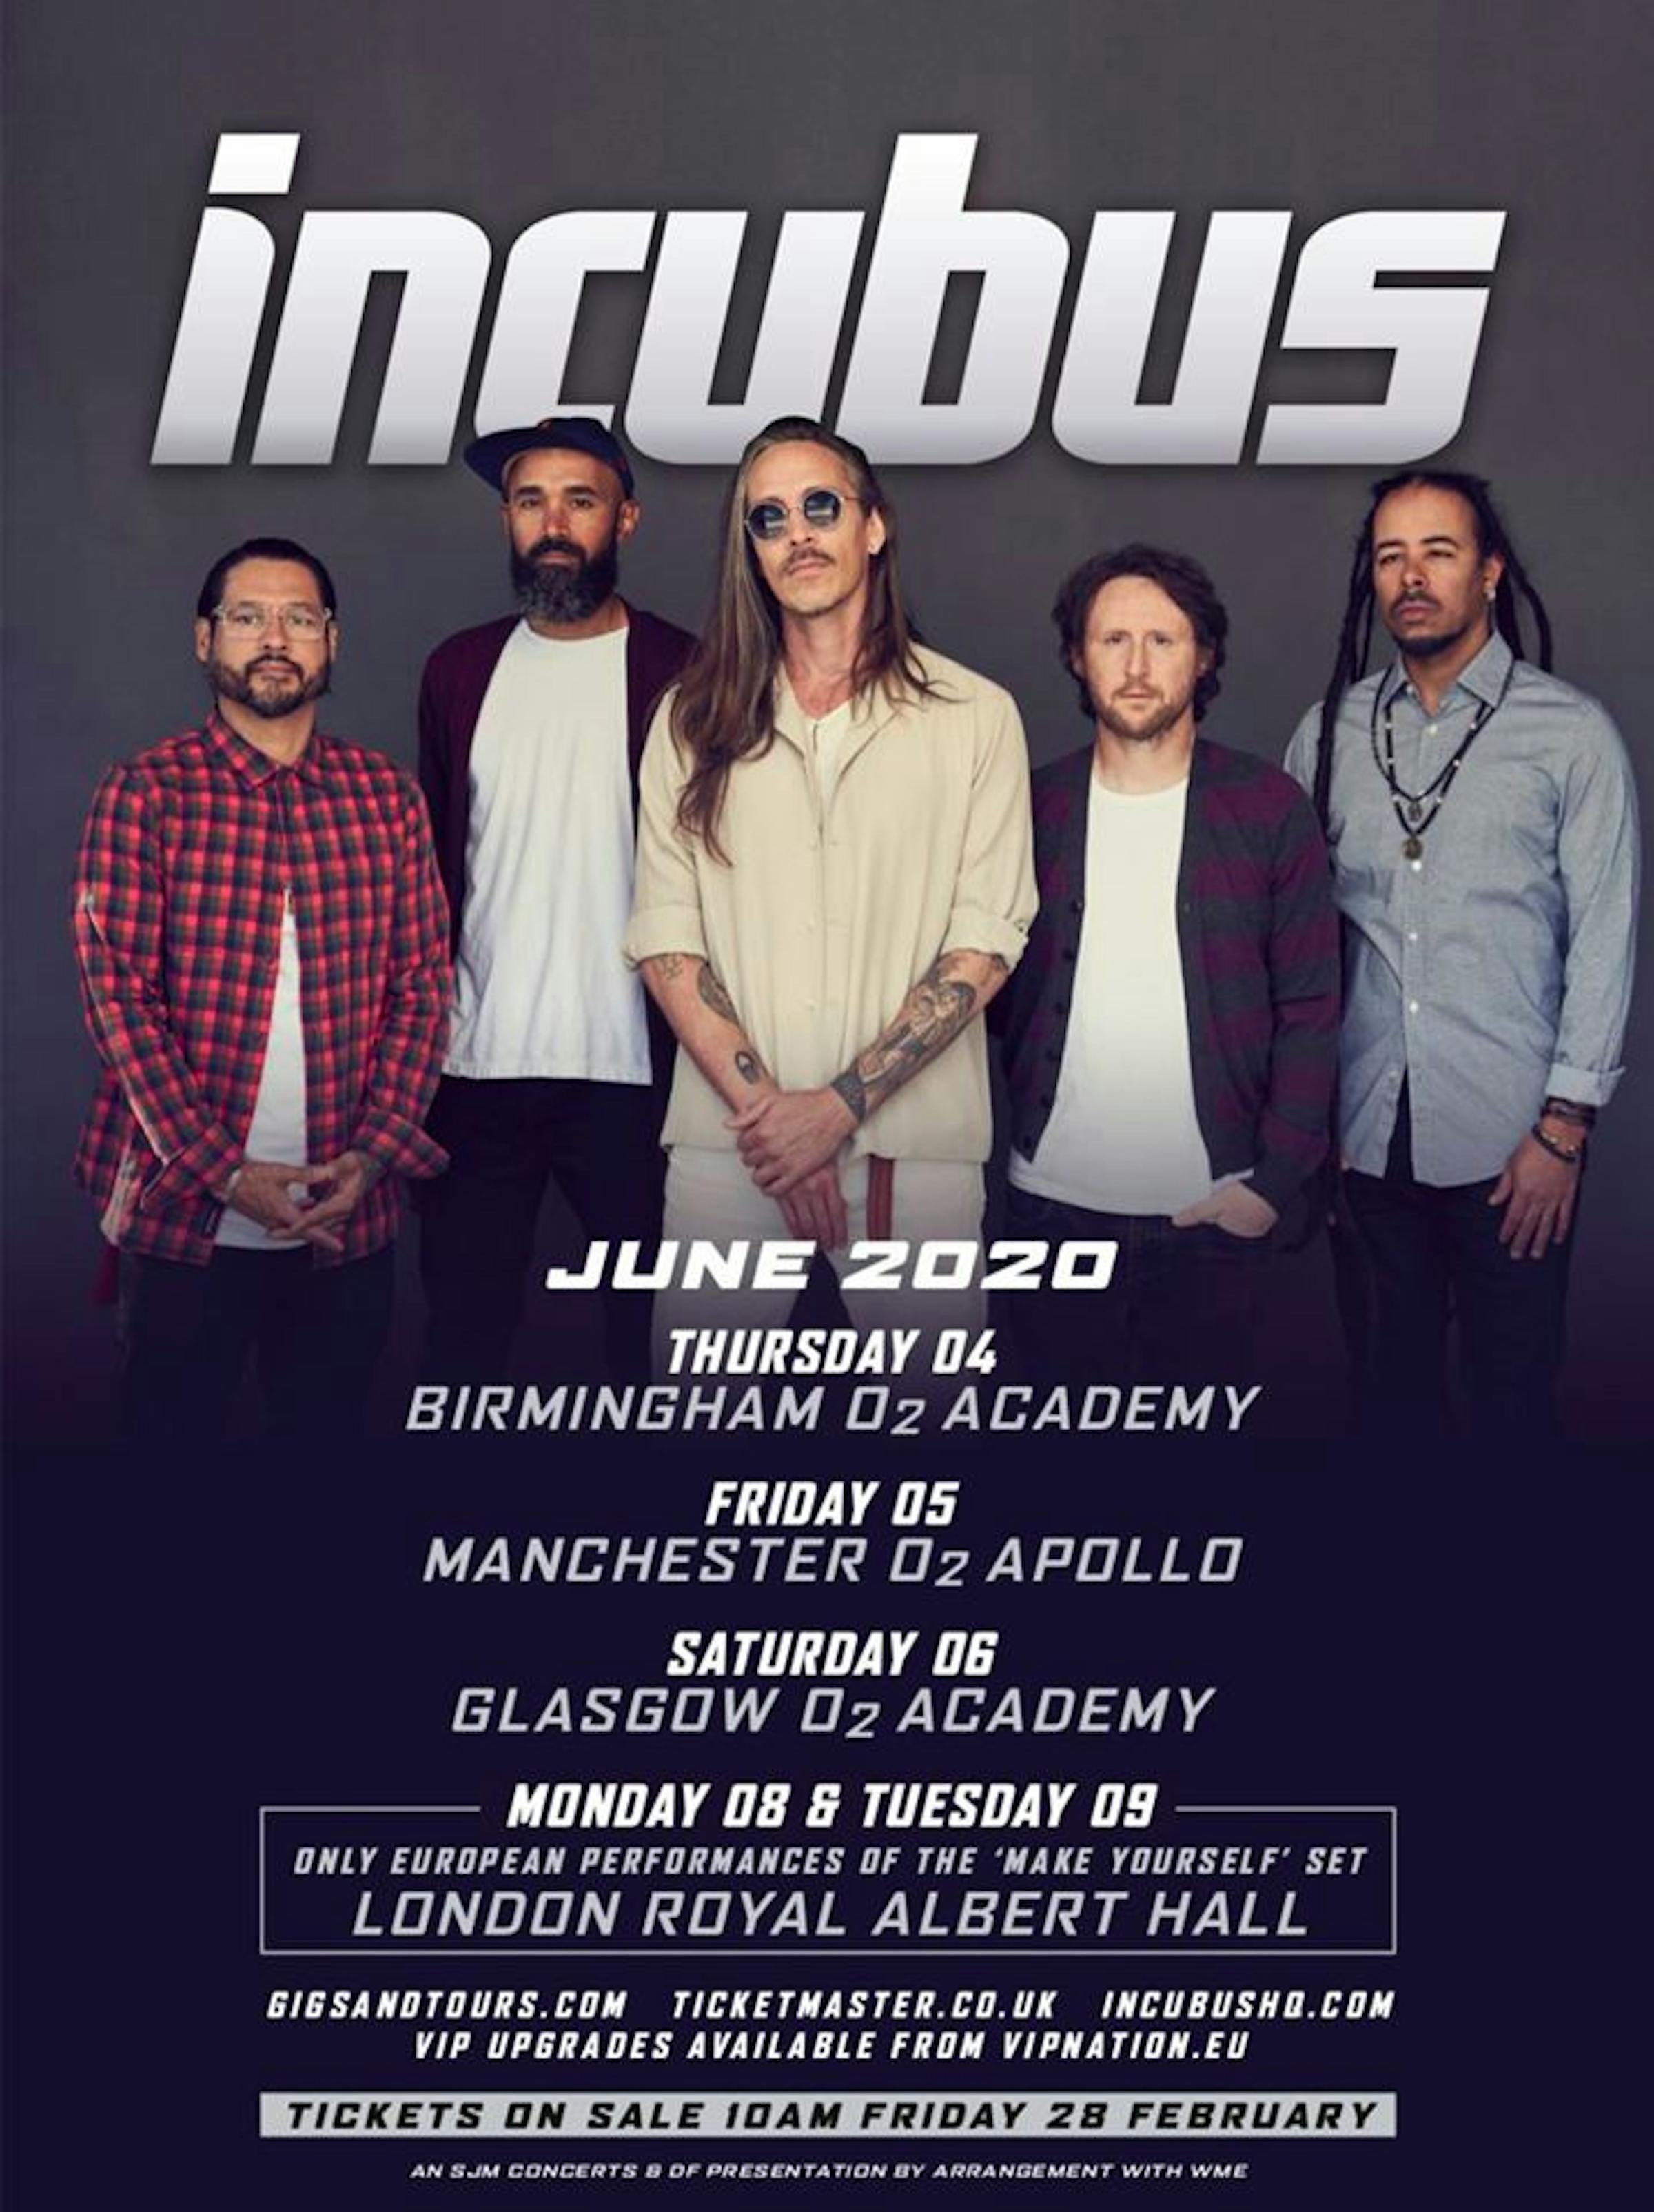 Incubus Announce UK Tour, Will Play Make Yourself In Full In London